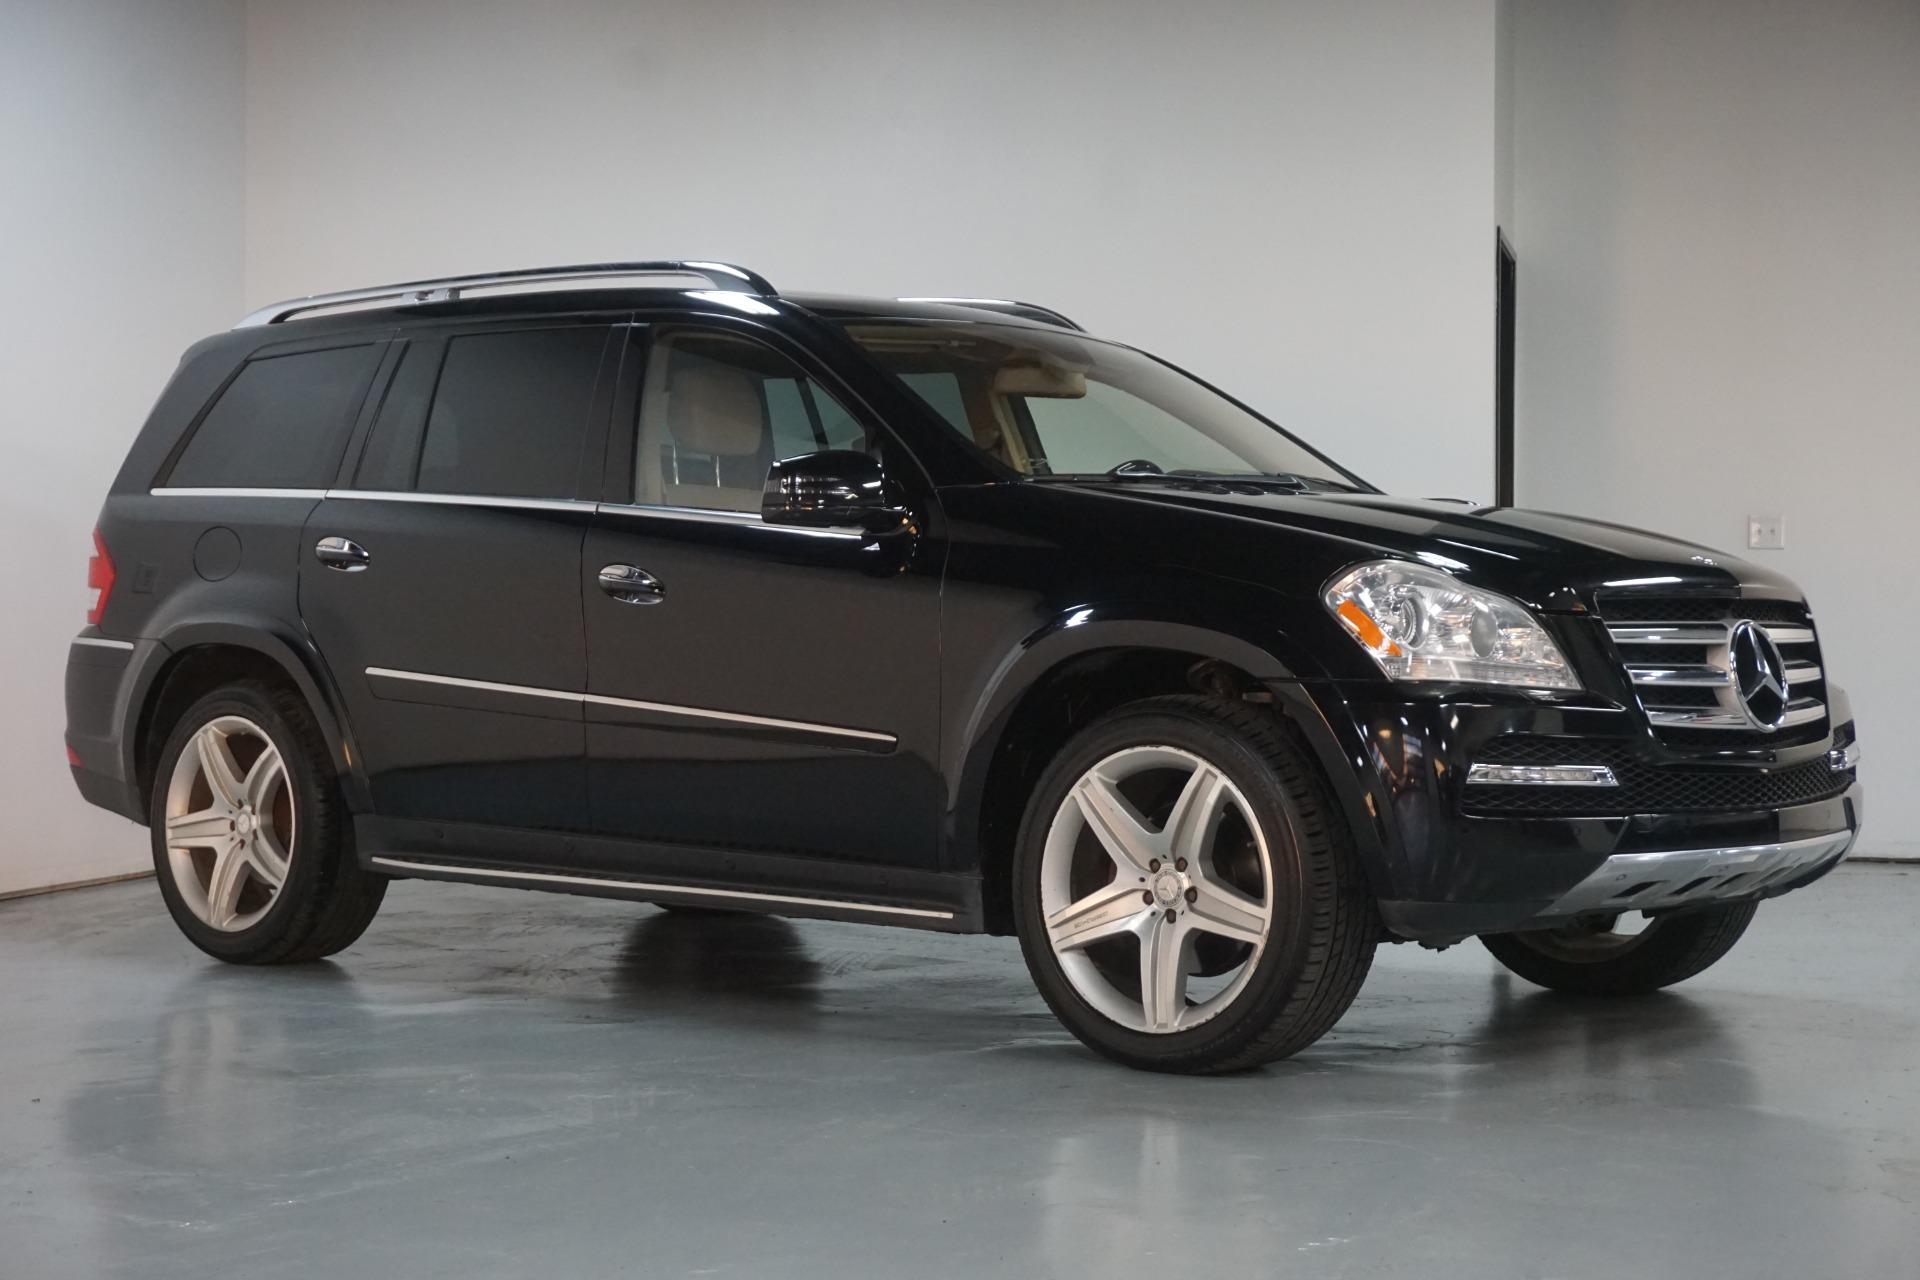 Used 2011 Obsidian Black Metallic Mercedes-Benz GL-Class GL550 AWD GL 550  4MATIC For Sale (Sold) | Prime Motorz Stock #2606